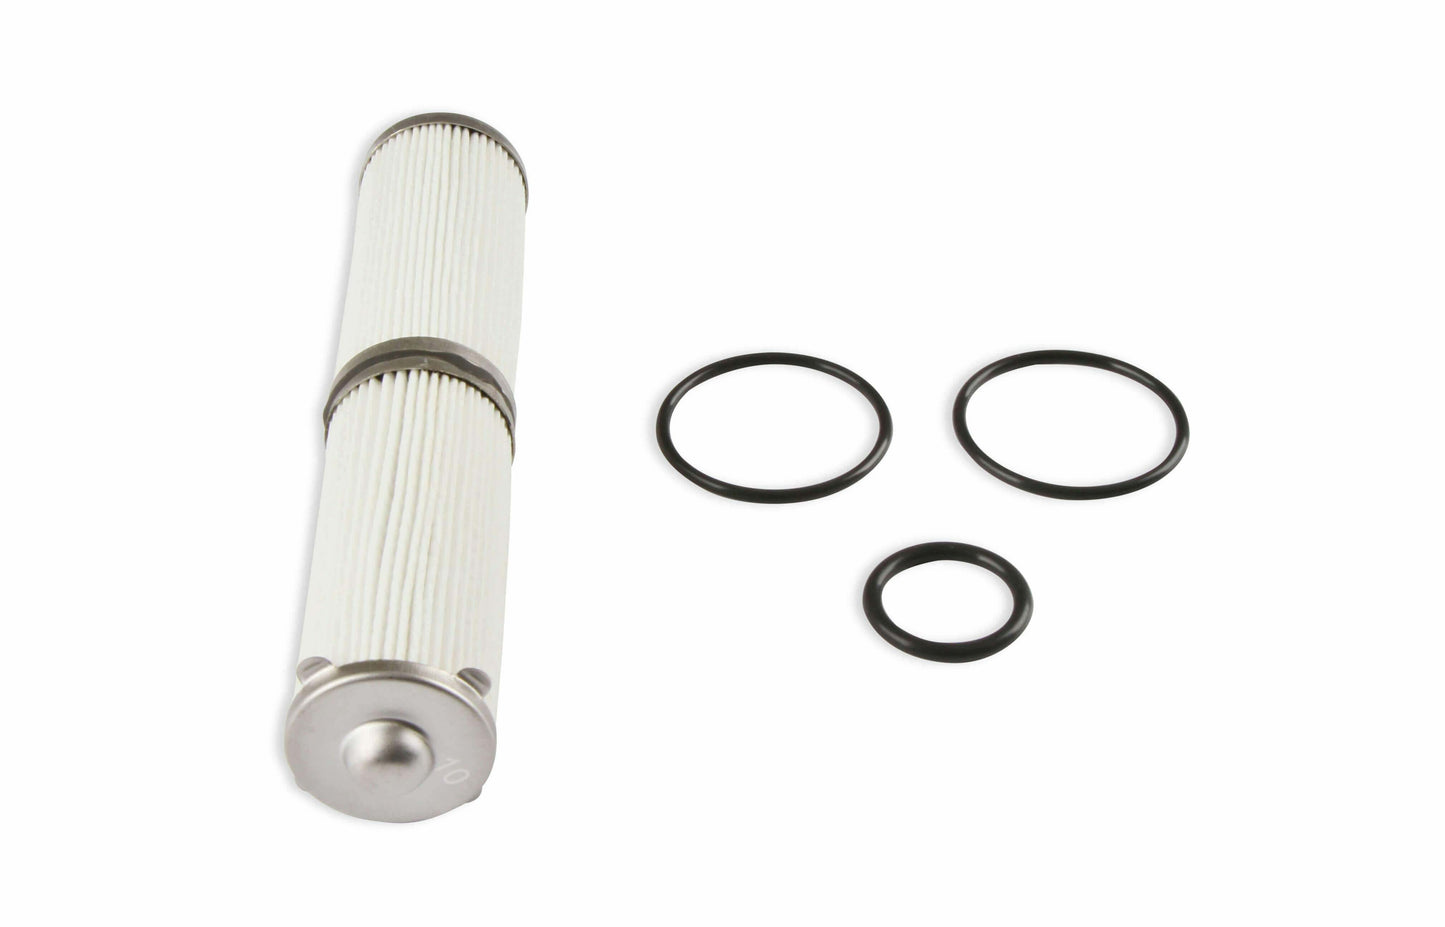 Fuel Filter Element and O-ring Kit - 162-580